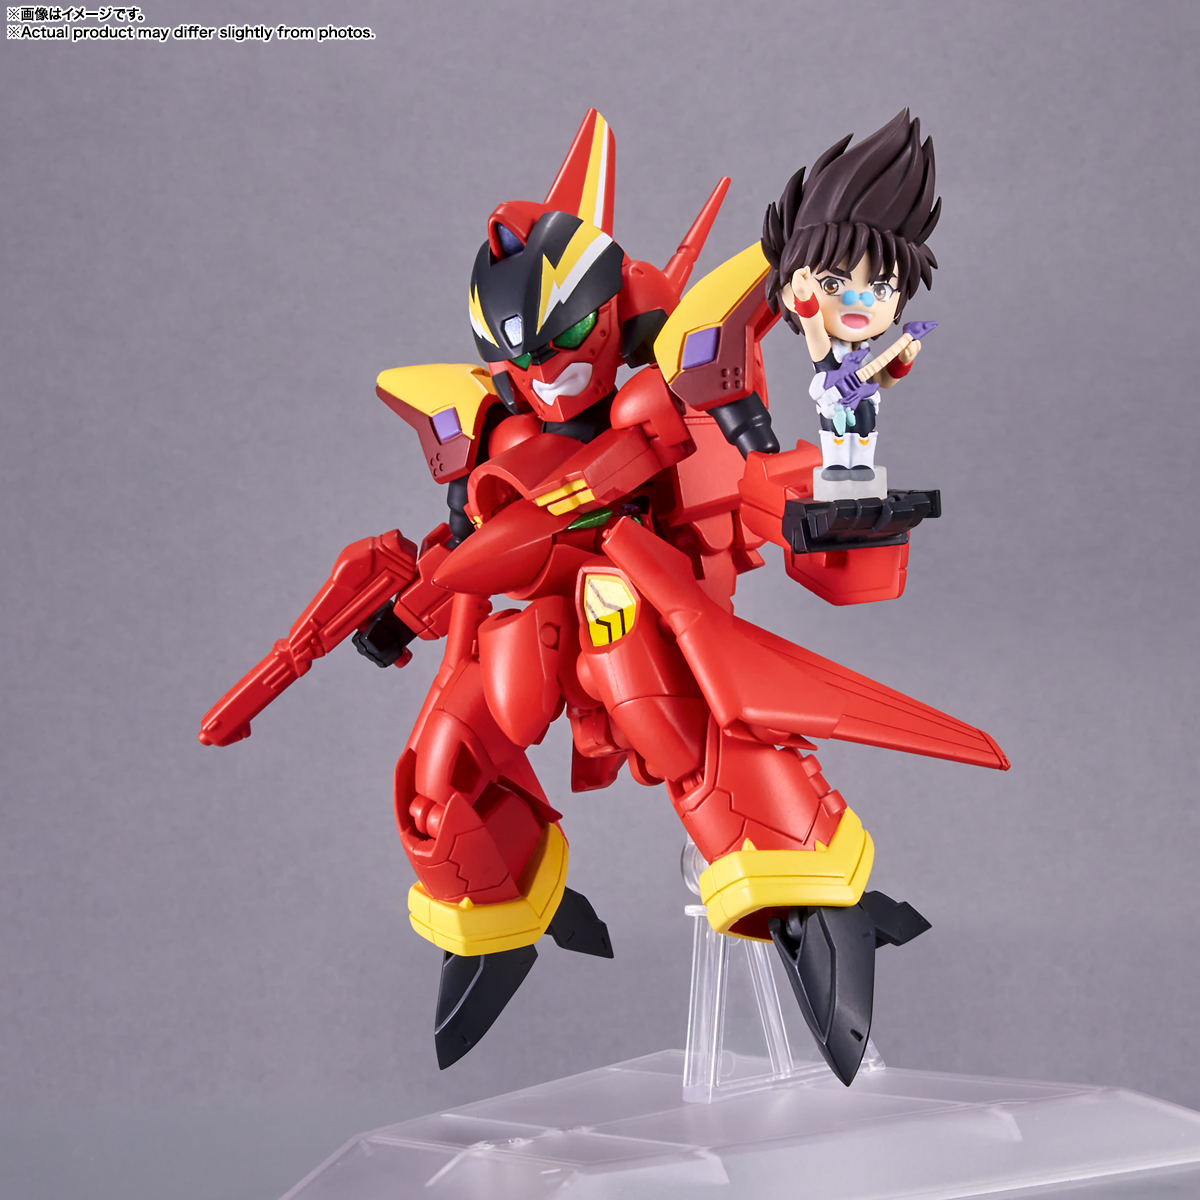 macross-7-vf-19-custom-fire-valkyrie-and-basara-nekki-tiny-session-action-figure-set image count 0